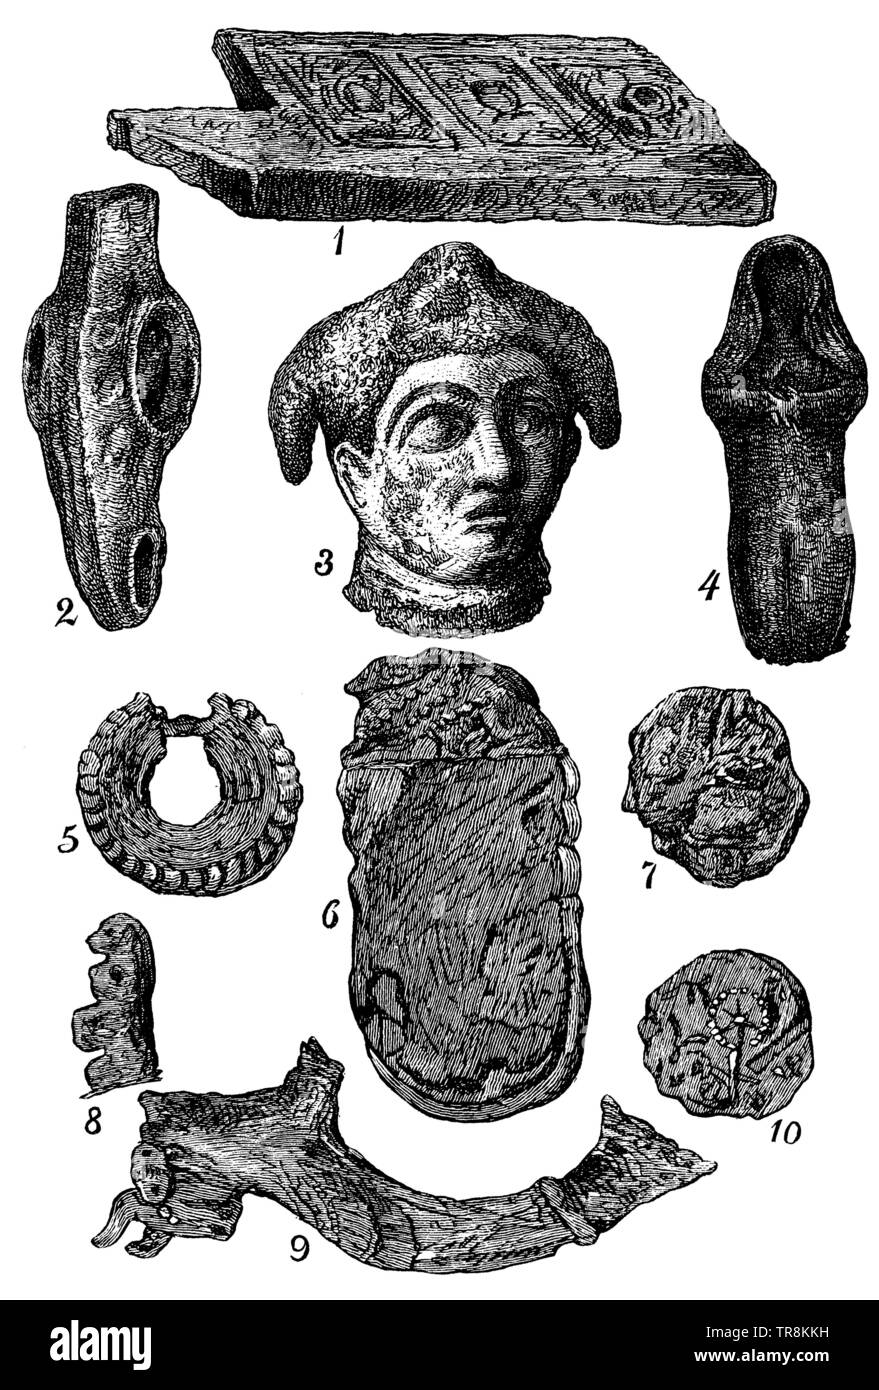 Babylonian antiquities. 1. threshold of the palace of Nebuchadnezzar; 2 and 4 axes; 3 stone head; 5 silver ornaments; 6 stone with sphinx-like figure; 7 and 10 coin (front and back); 8 figure of a monkey; 9 silver handle from a drinking vessel, ,  (encyclopedia, 1893) Stock Photo